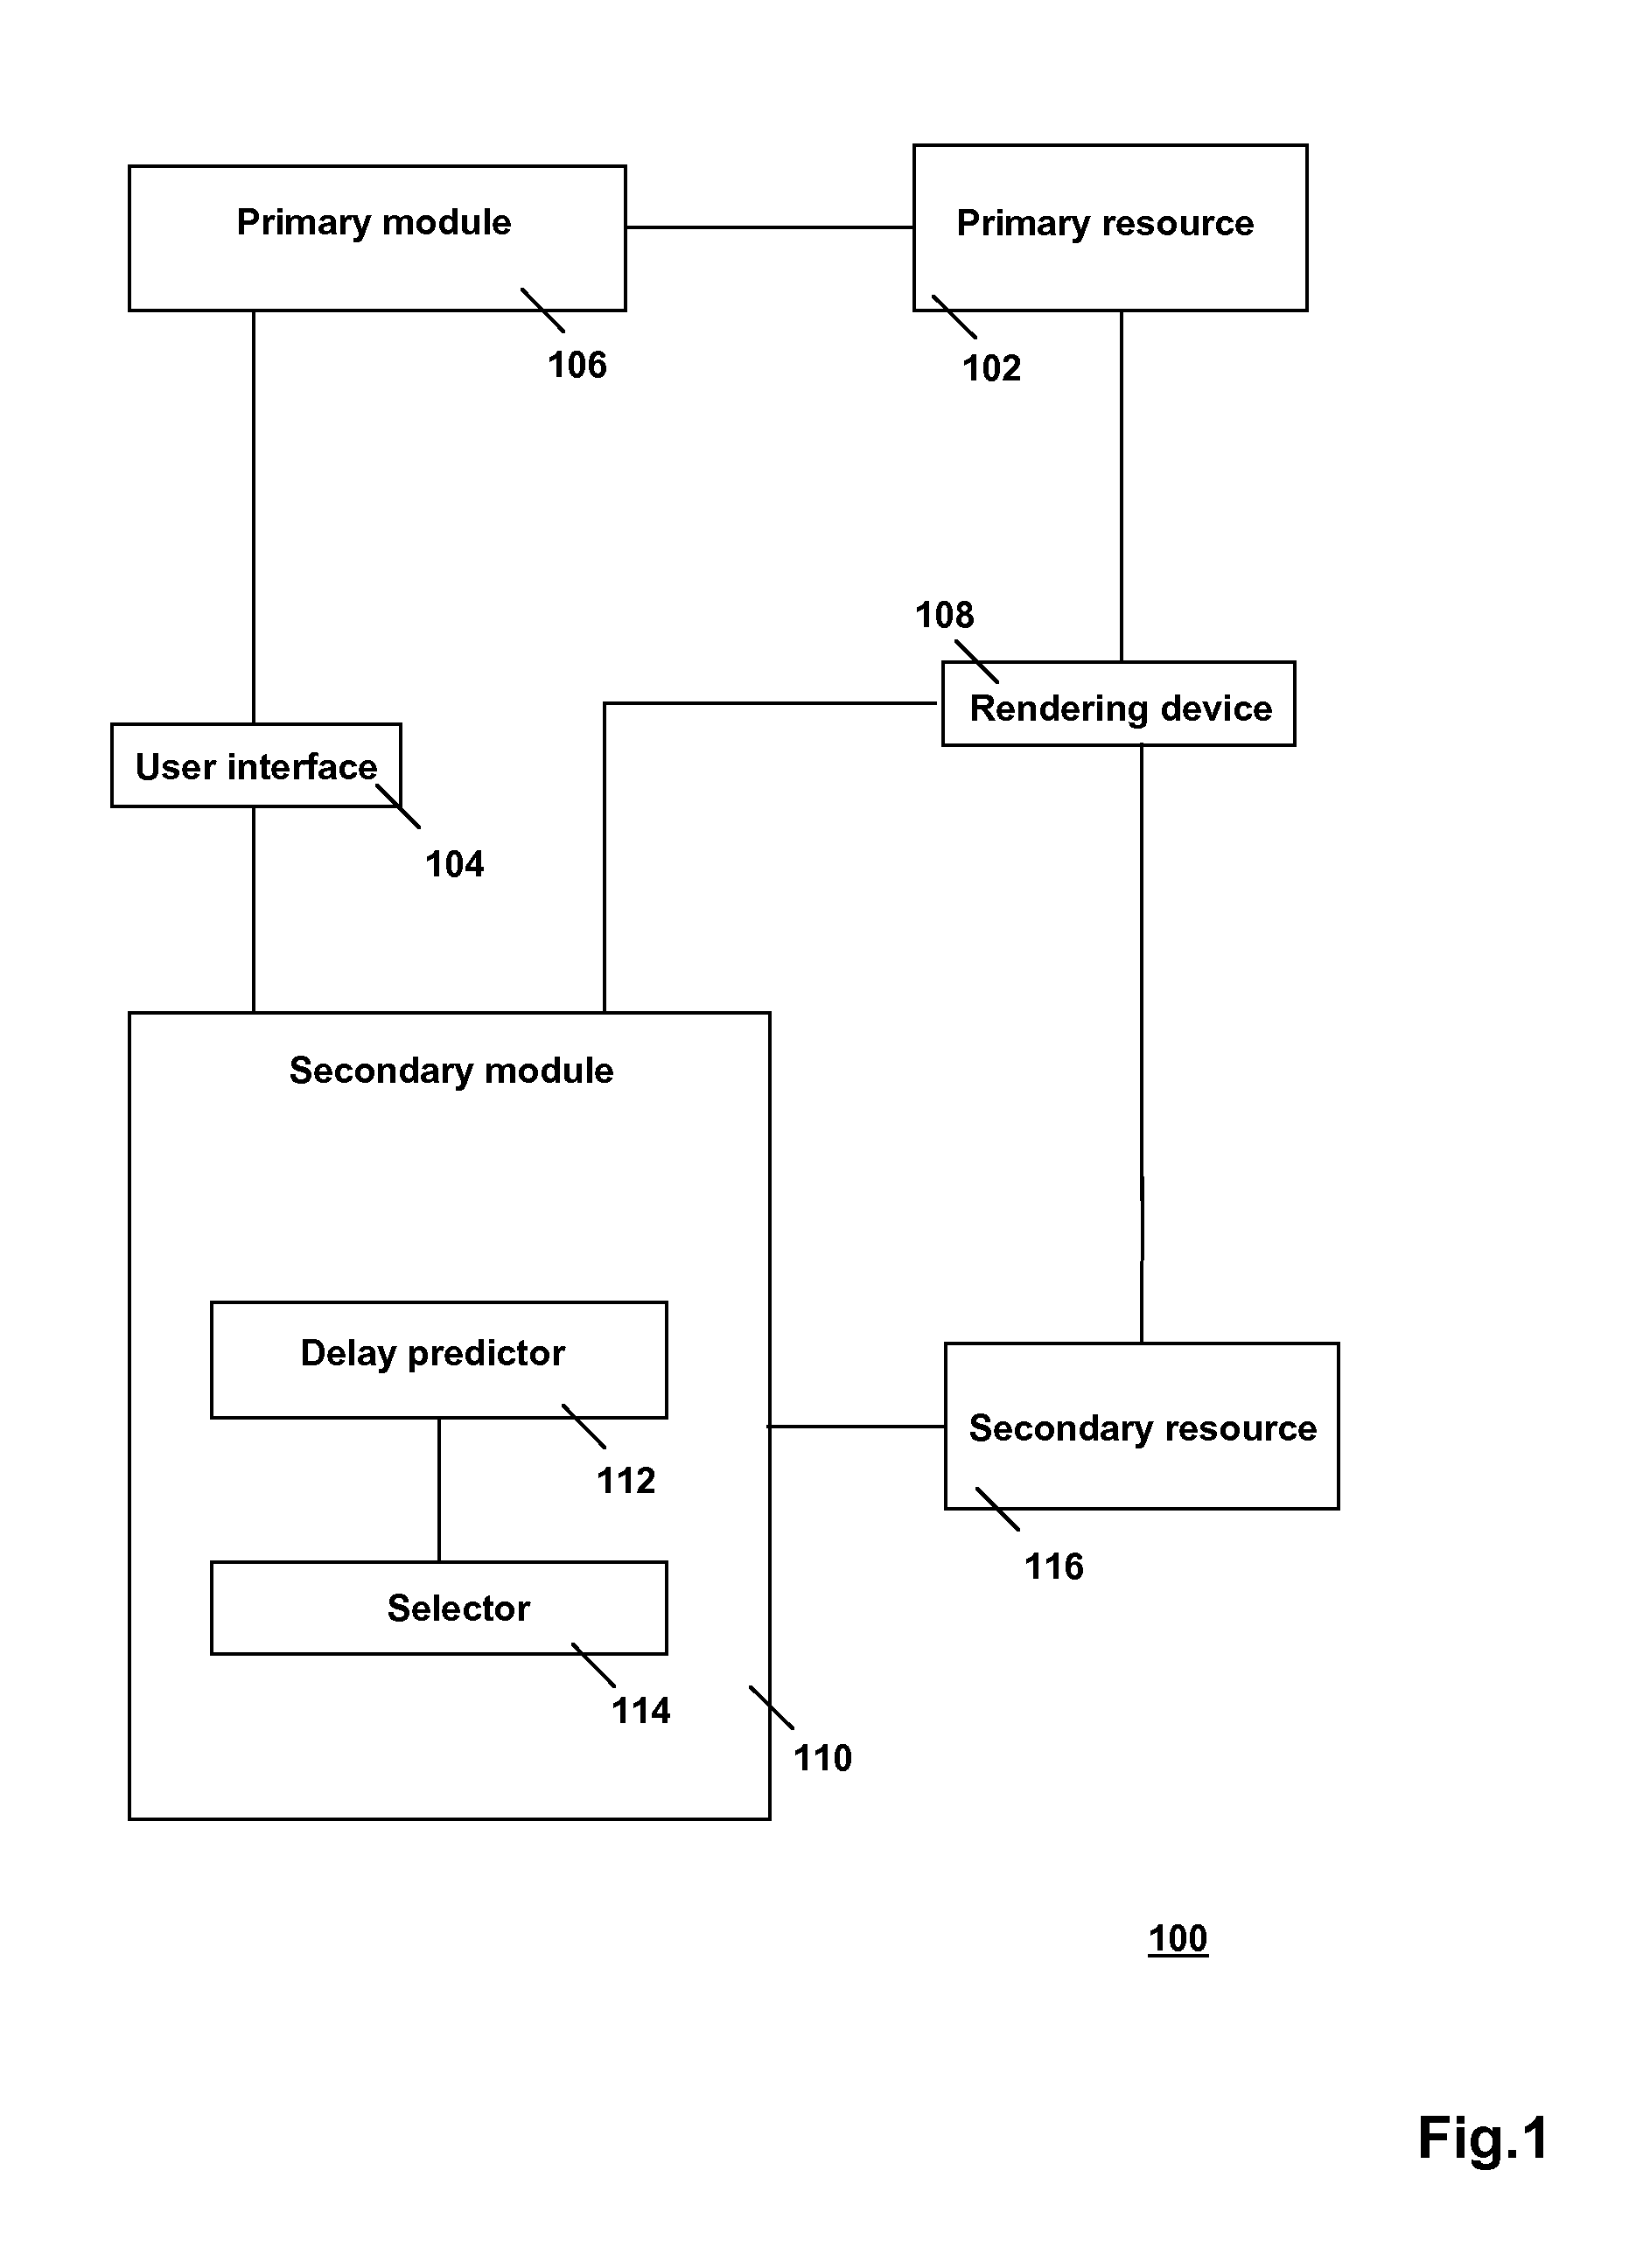 Playing Out Interludes Based on Predicted Duration of Channel-Switching Delay or of Invoked Pause